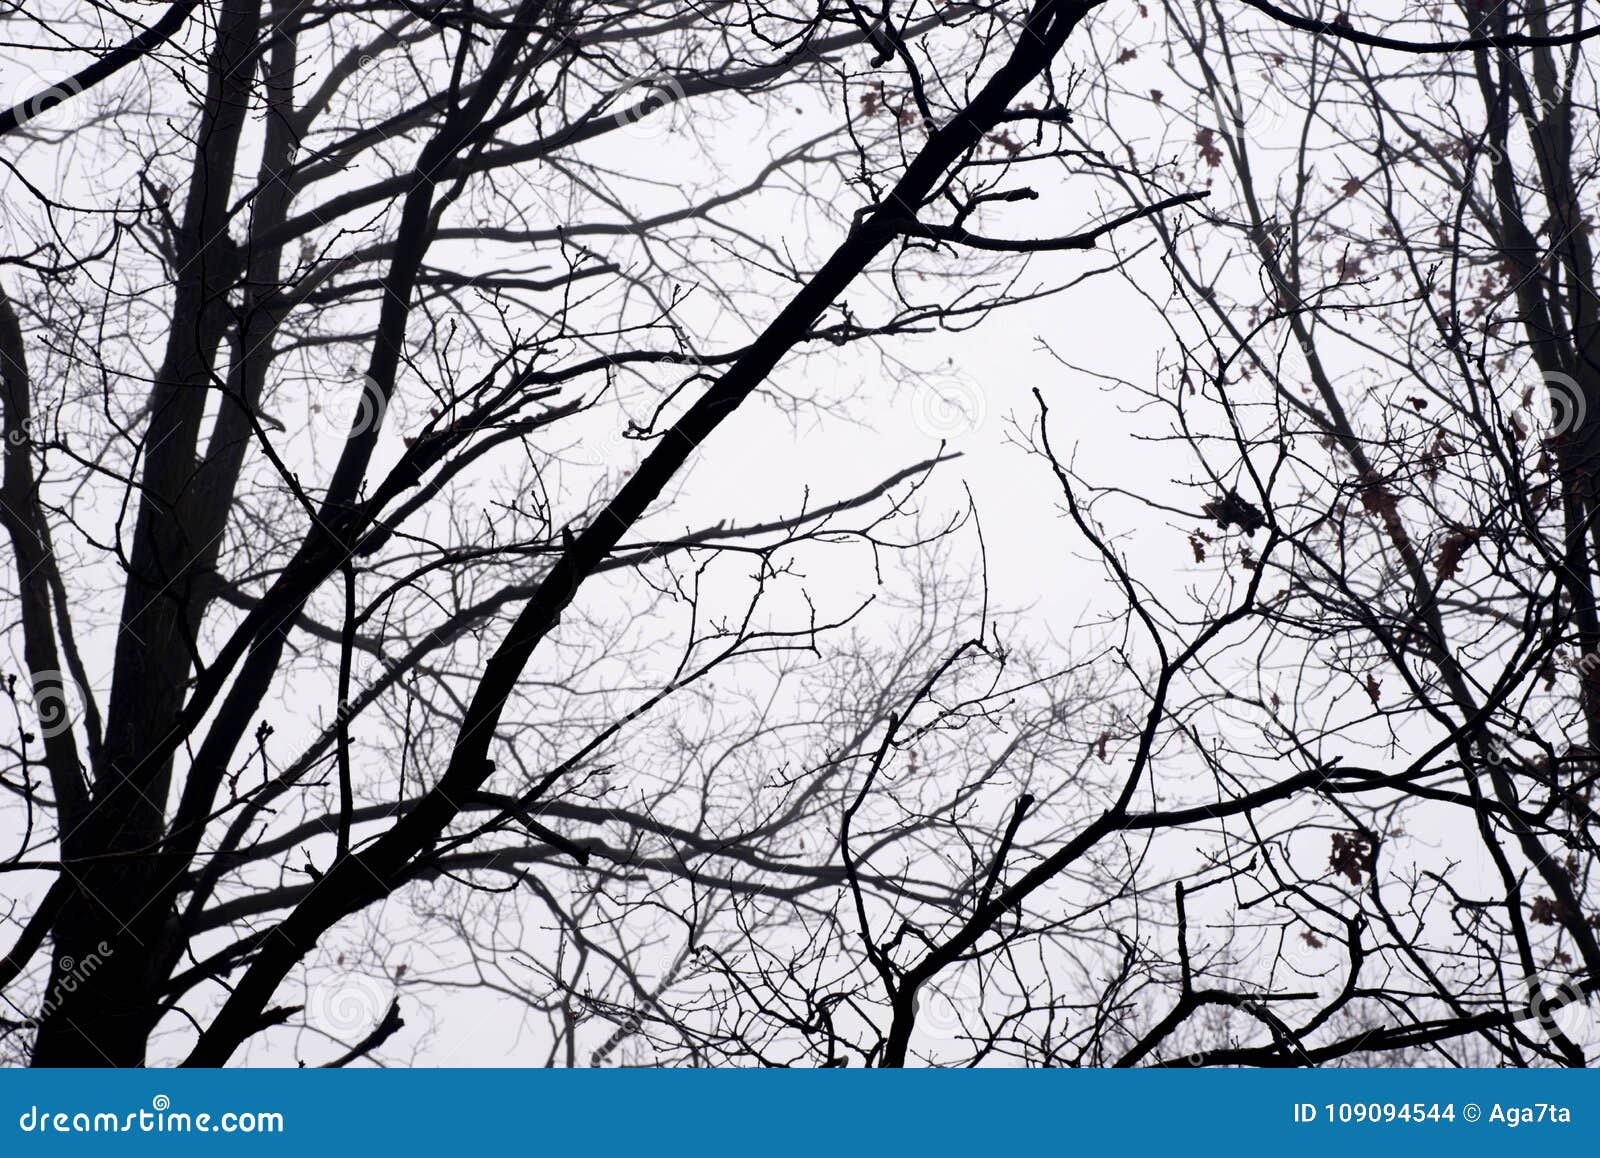 Barren Tree Branches Against Sky on Foggy Morning Stock Photo - Image